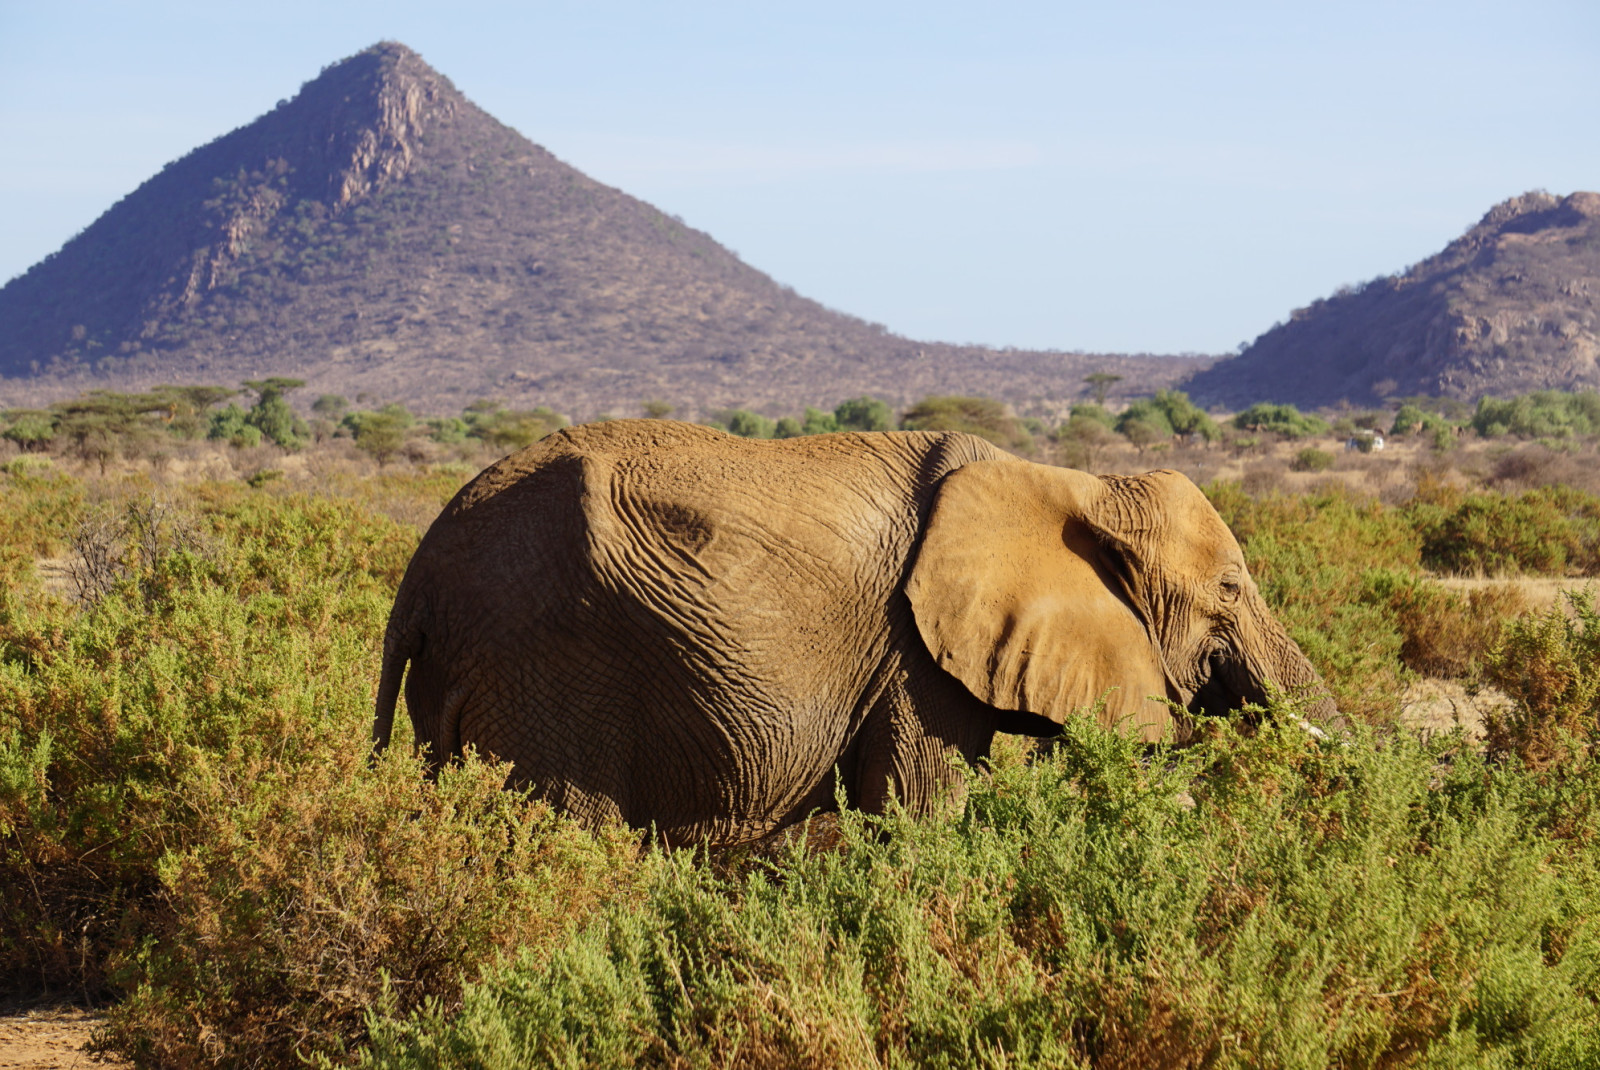 Elephant amongst shrubs with mountain in background in Kenya.